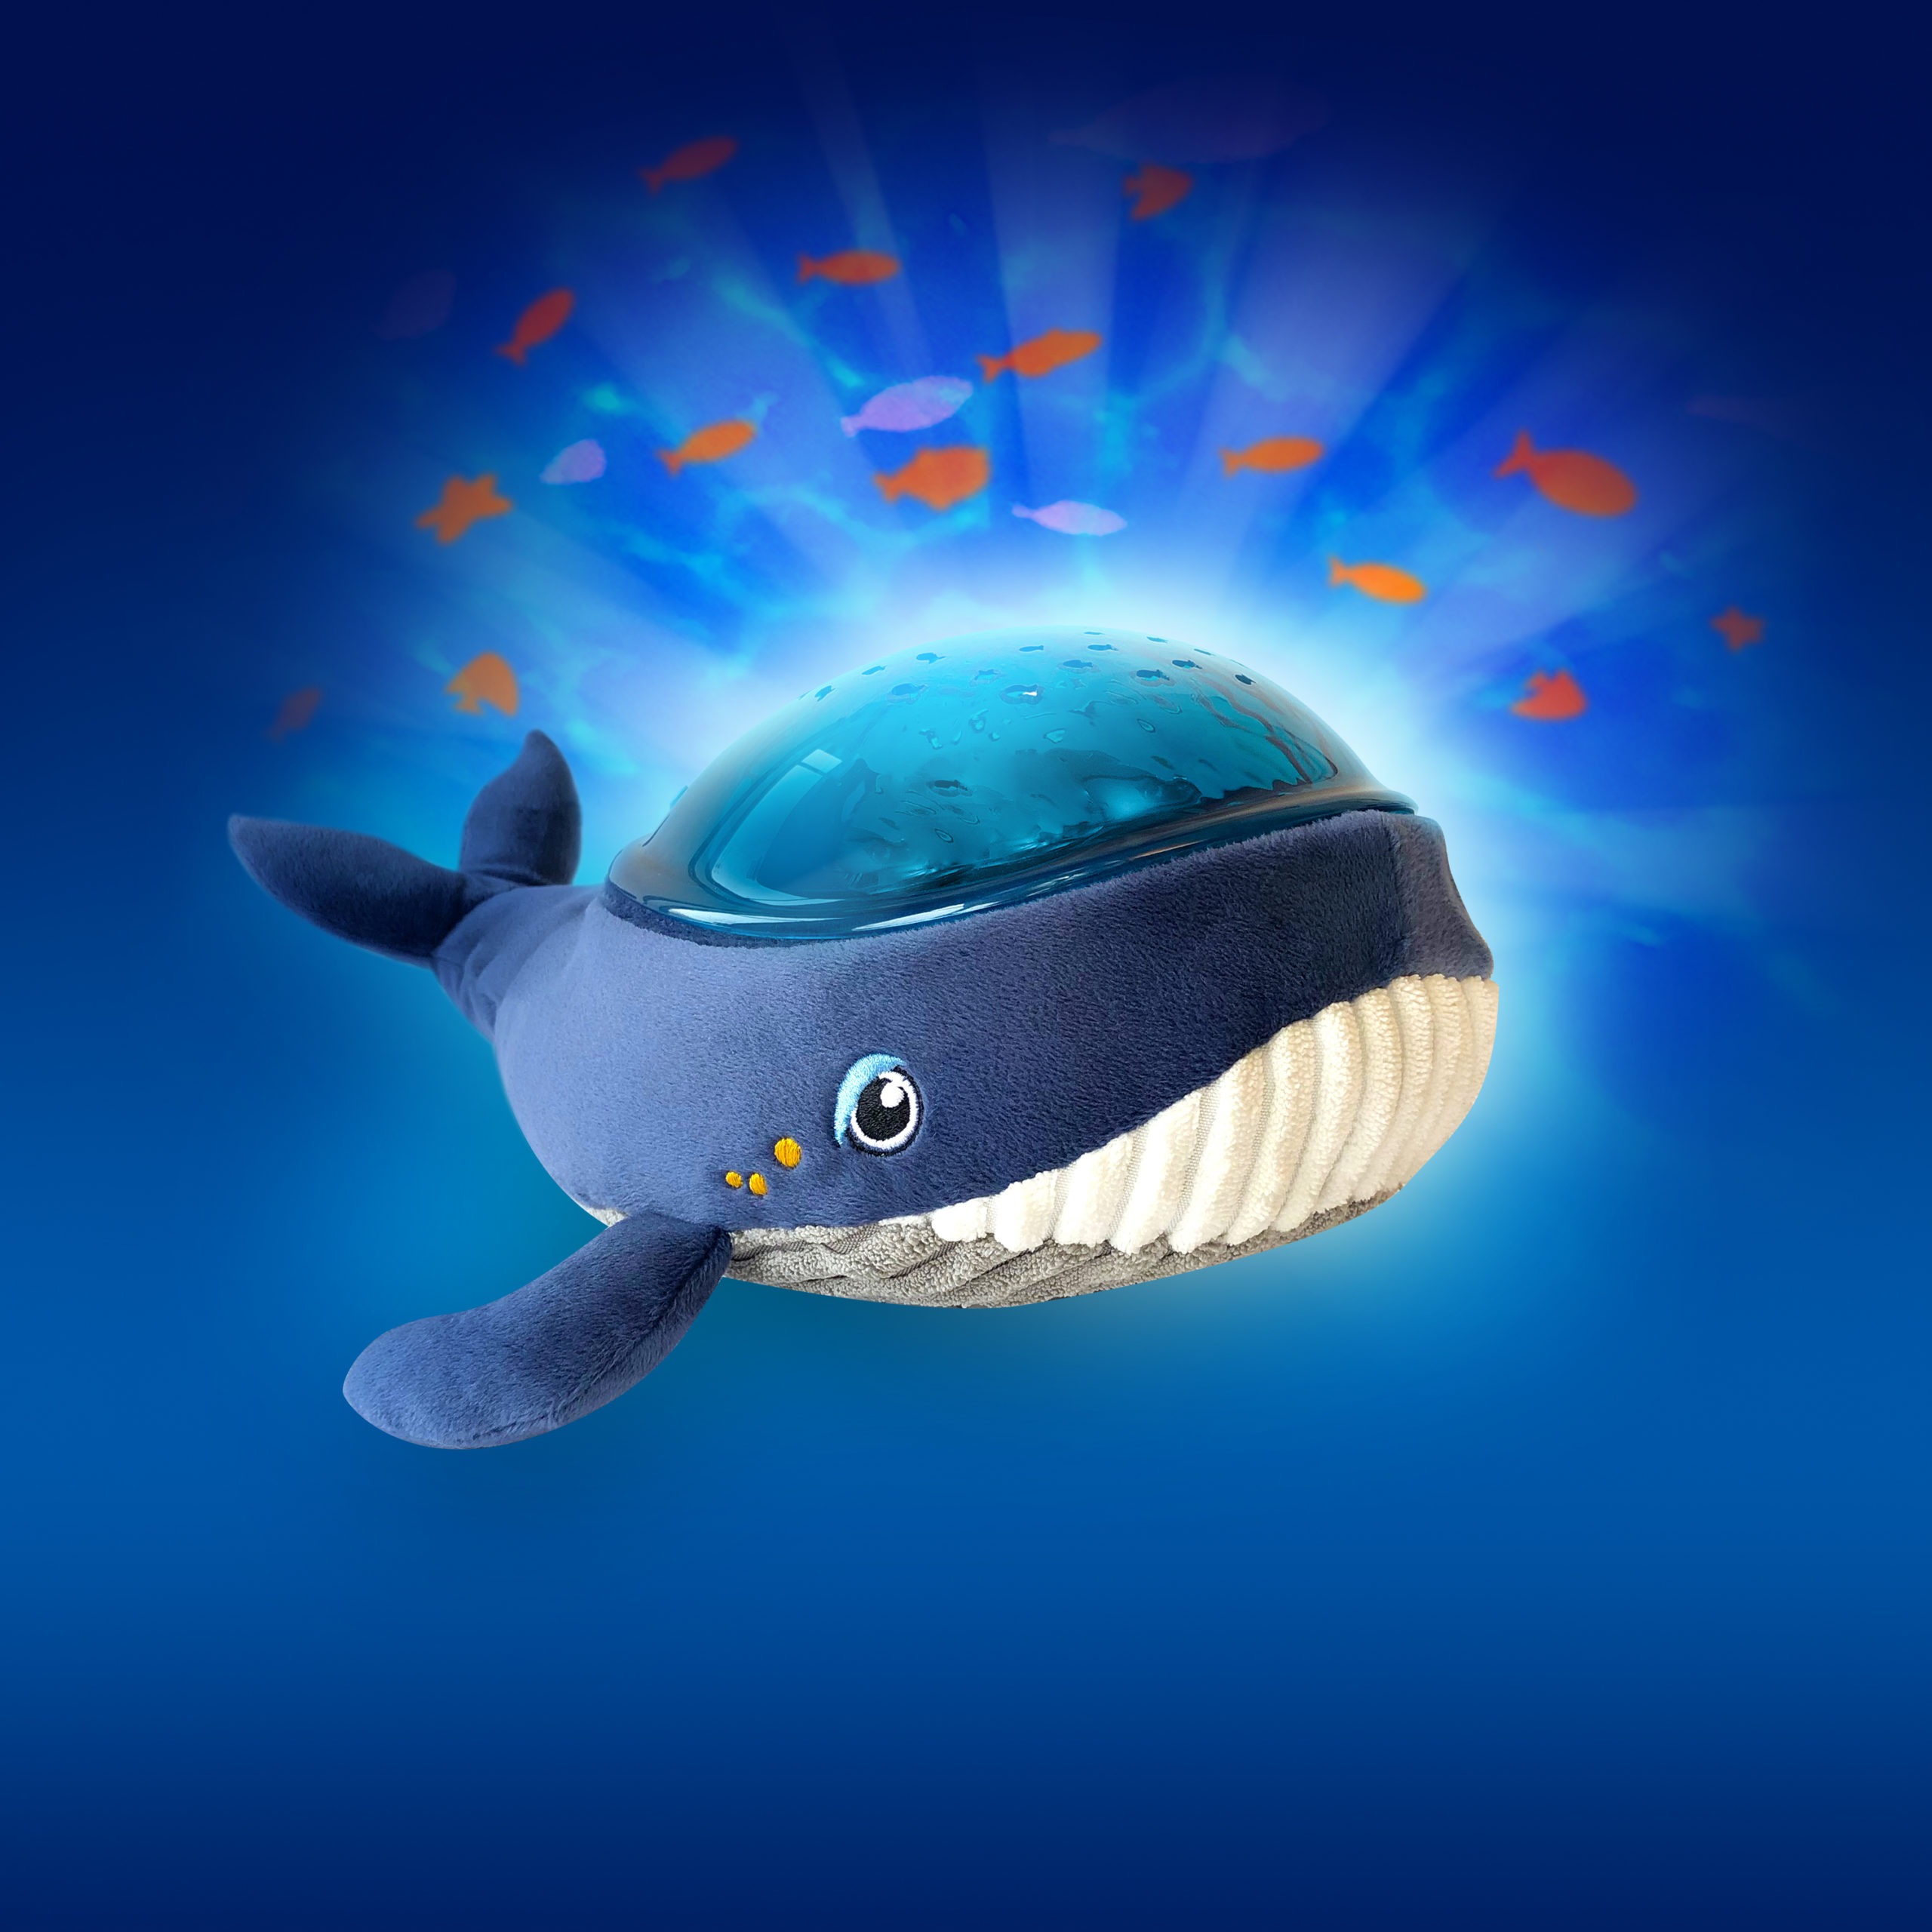 Veilleuse baleine tranquil whale blanche : Veilleuses, Lampes